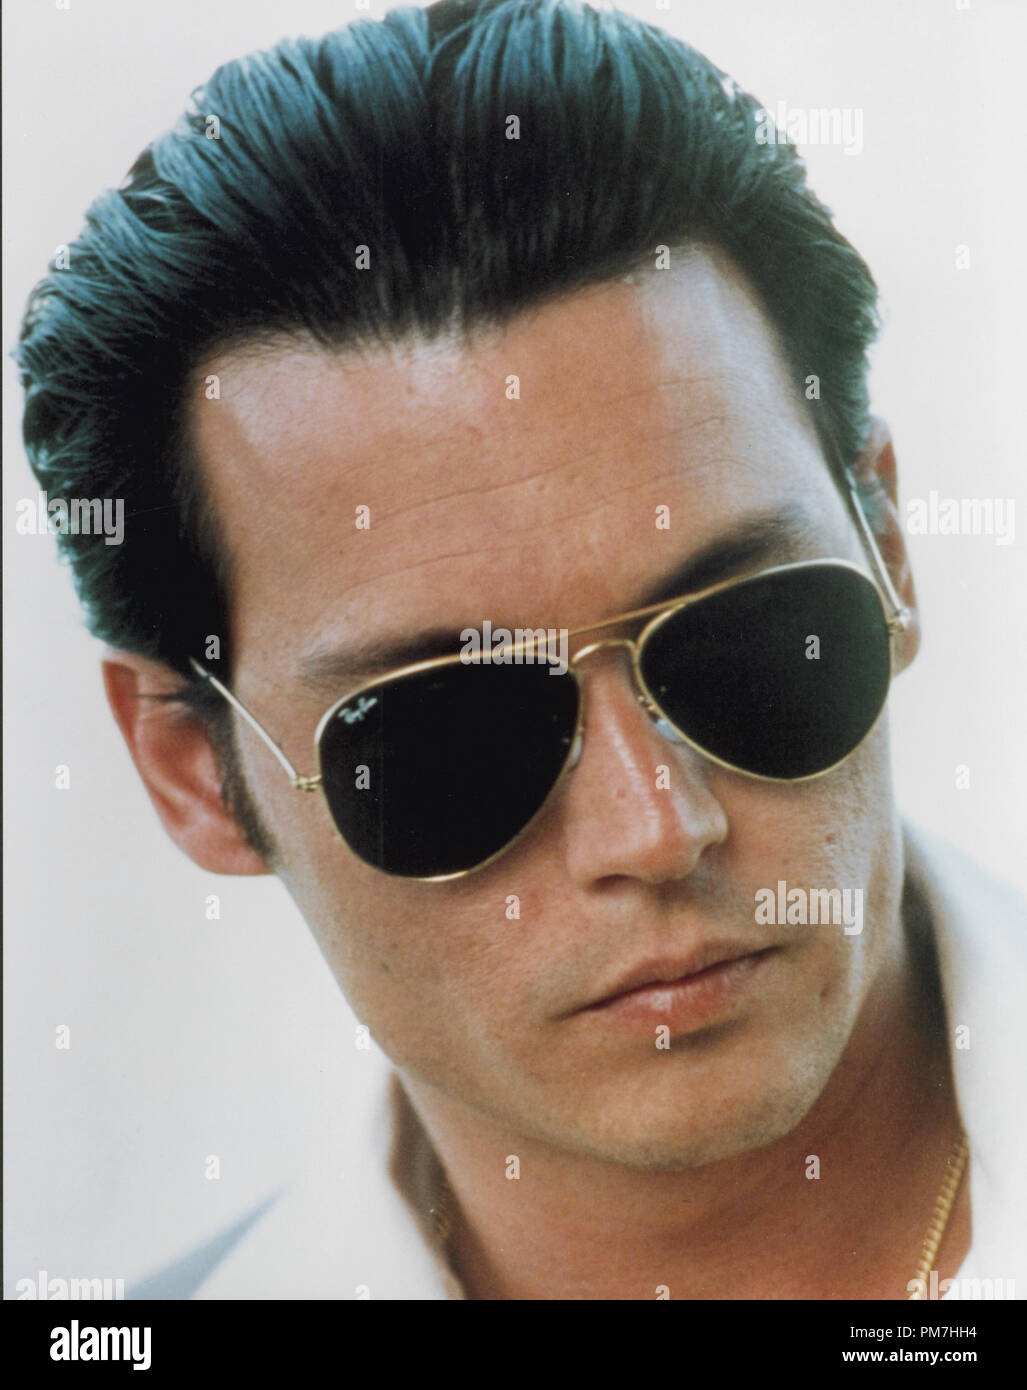 Film Still from 'Donnie Brasco' Johnny Depp © 1997 TriStar Pictures   File Reference # 31013366THA  For Editorial Use Only - All Rights Reserved Stock Photo